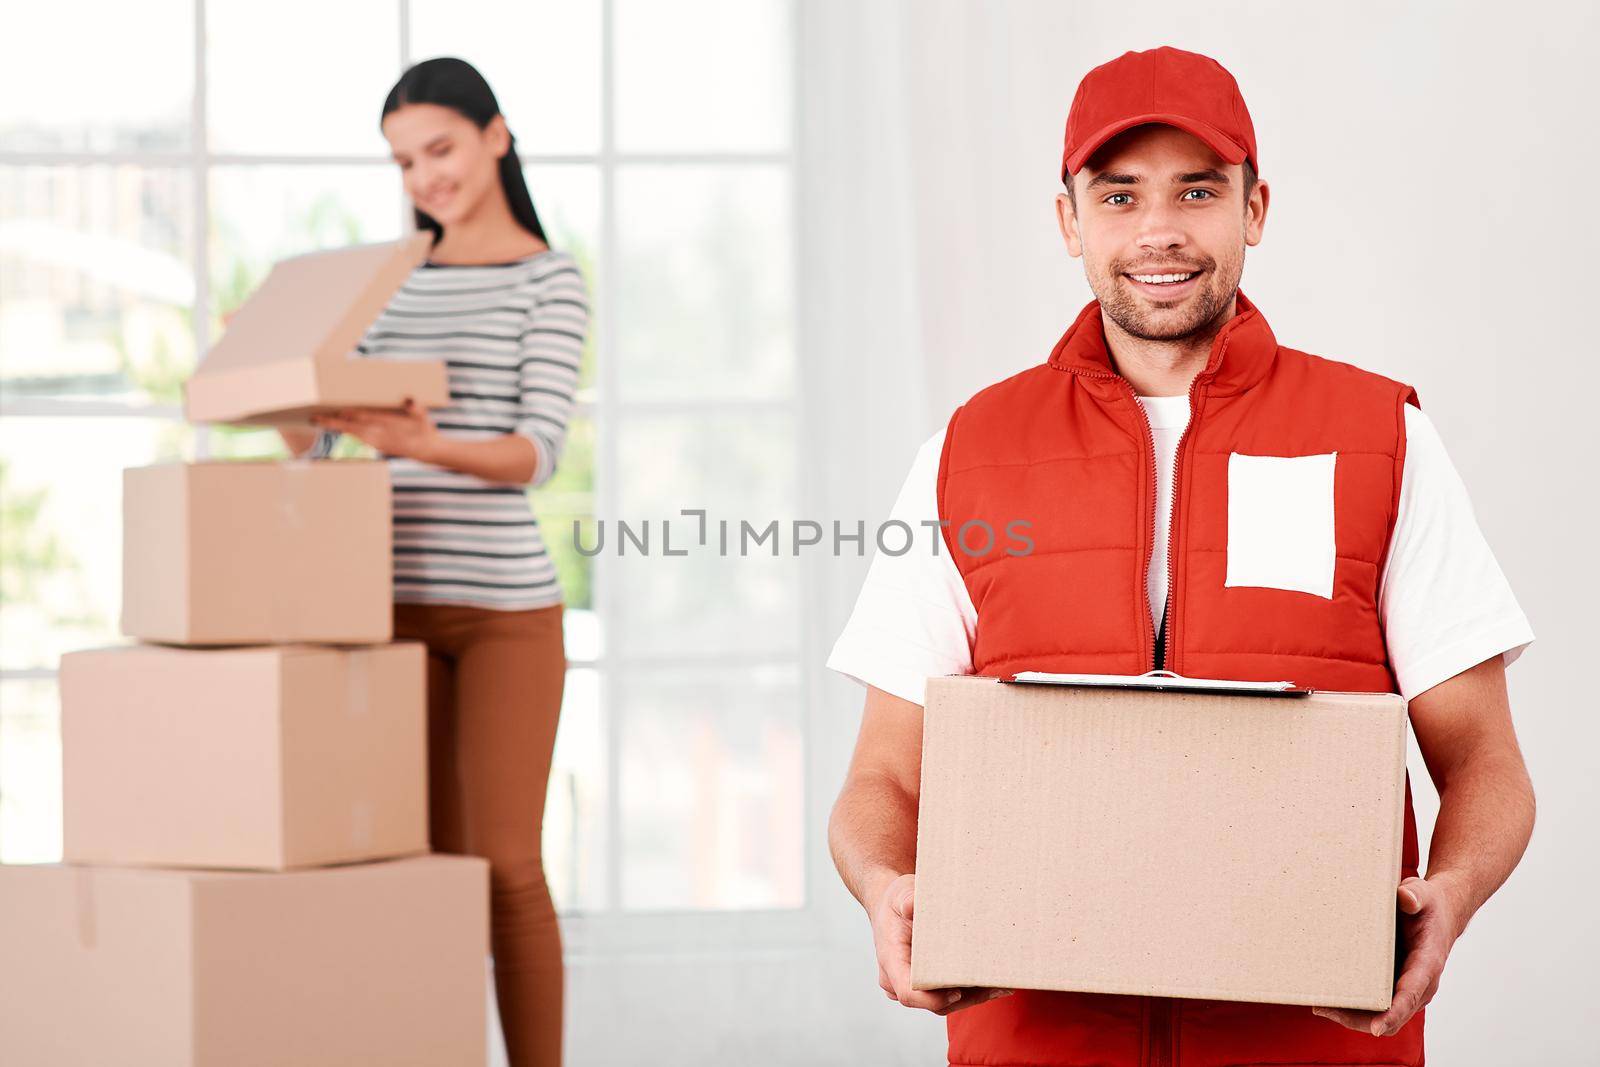 Young courier in red postal uniform standing with parcels indoors, looking at the camera with a smile. Woman unpacking her purchases in the background. A stack of carton boxes. Bright interior. Friendly worker, high quality delivery service